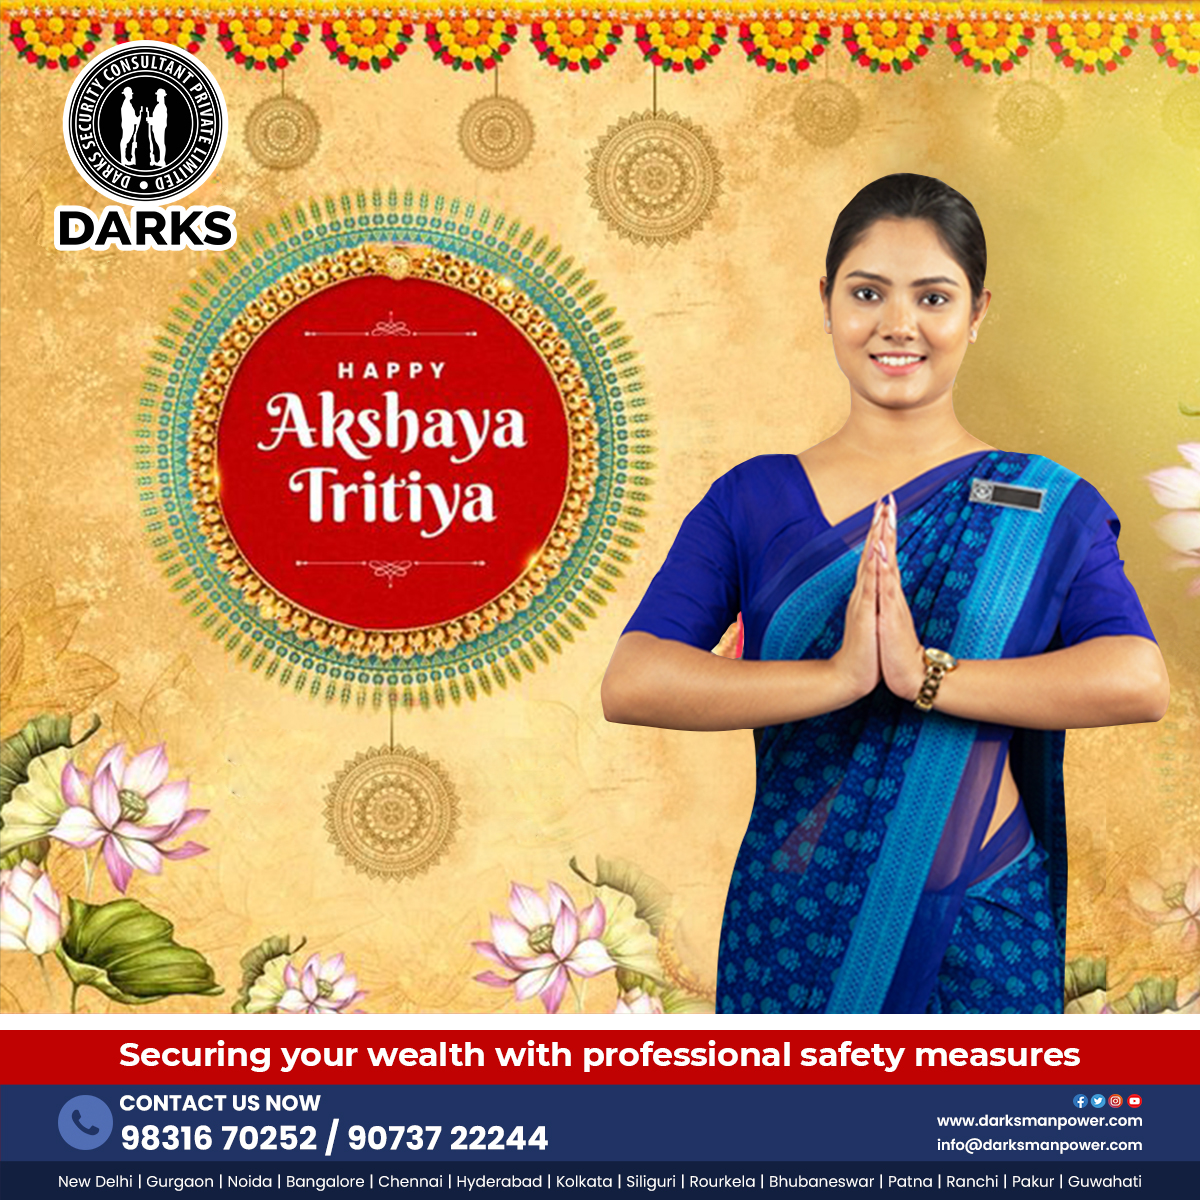 Darks Manpower wishes you Akshay Tritiya and wishes that you stay secured in all the aspects of life.

#AkshayaTritiya #ProsperityOnAkshayaTritiya #HappyAkshayaTritiya #goddesslaxmi #Darksmanpower